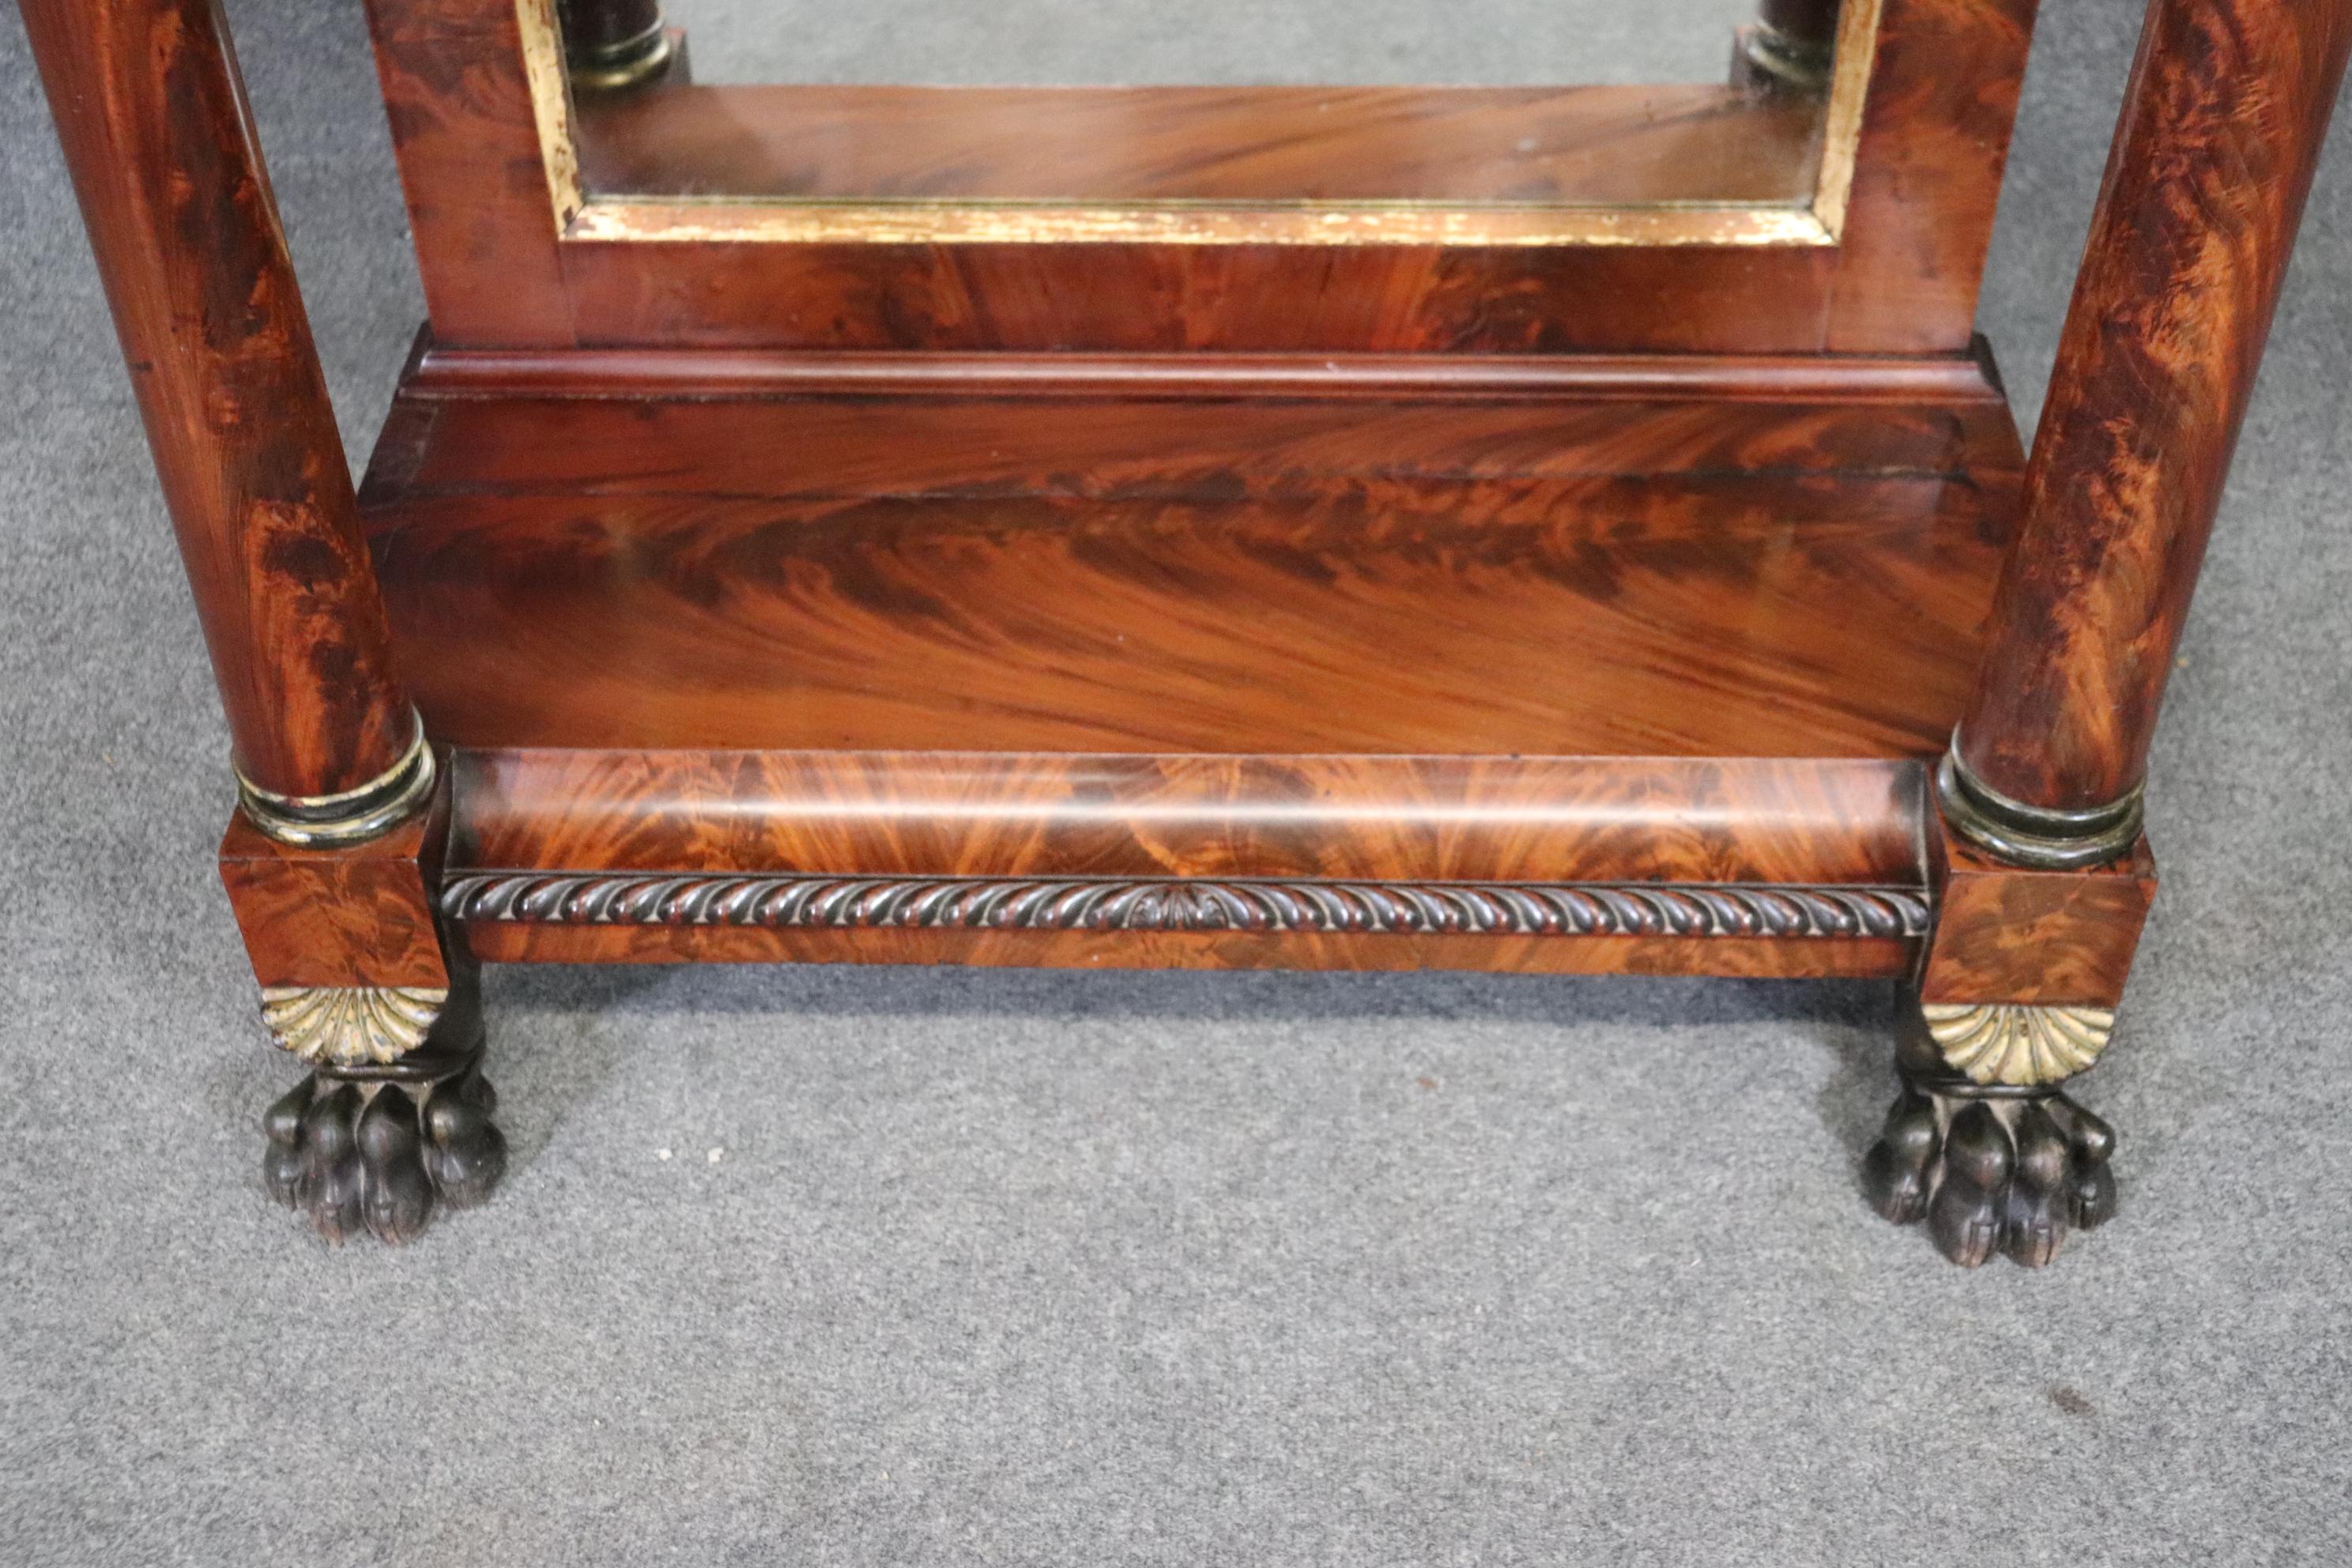 Rare New York or Philadelphia Flame Mahogany Marble Top Pier Console Table 4